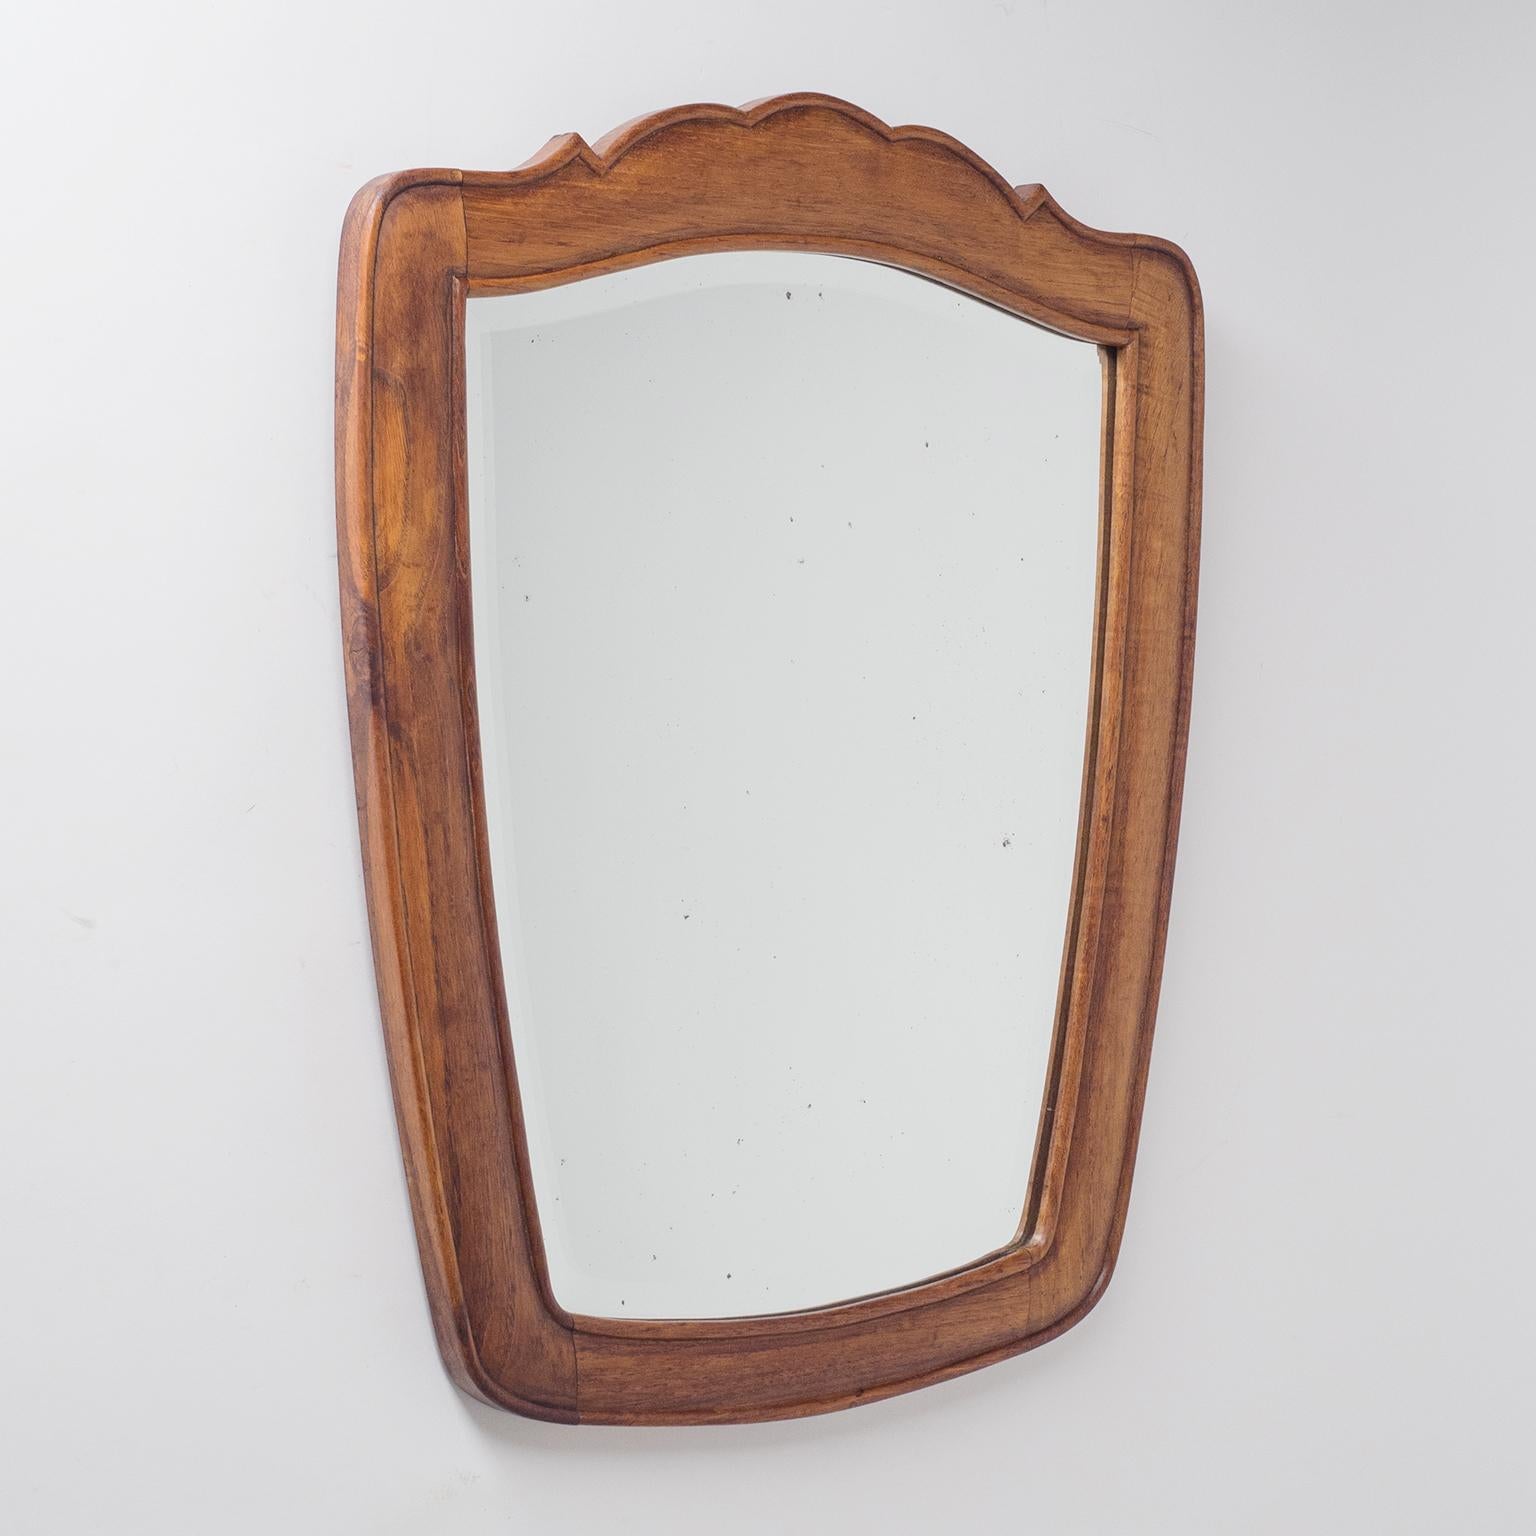 Rare Italian carved wood mirror from the 1930s. Solid hardwood frame with original facetted mirror. Original wall mount has a distance so that mirror will be slightly tilted downward.